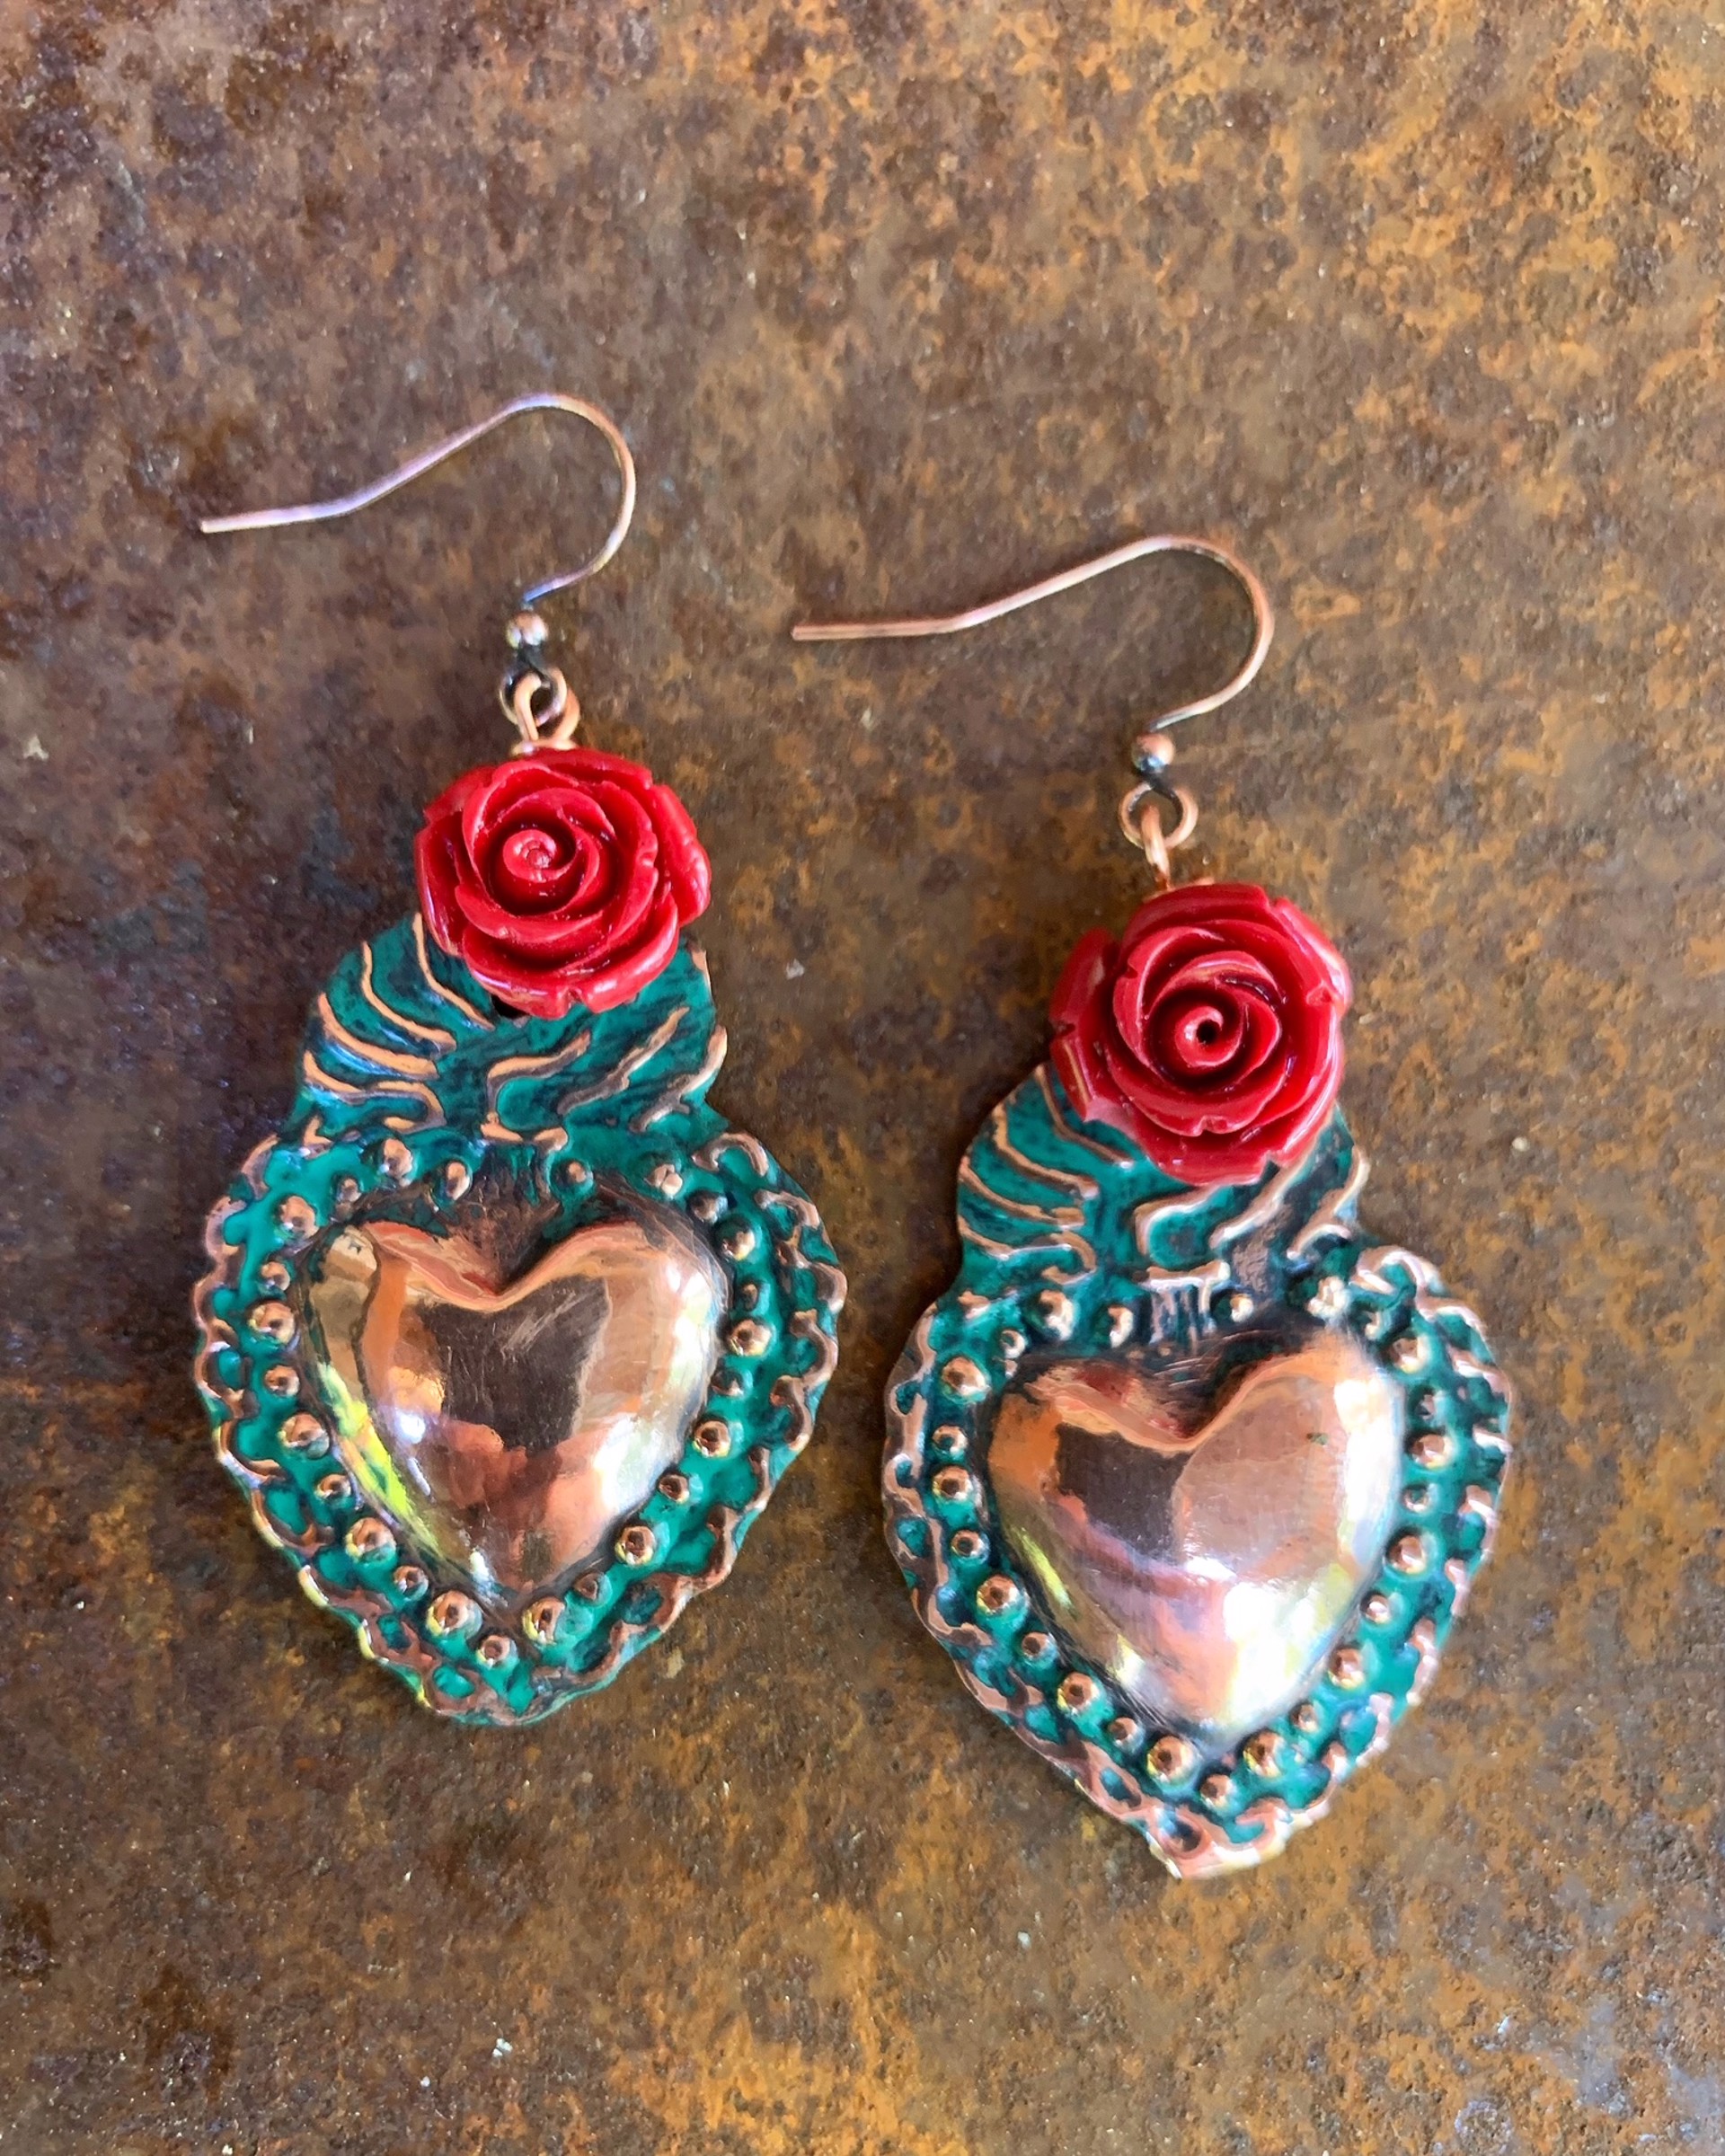 K852 Sacred Heart Earrings with Red Roses by Kelly Ormsby